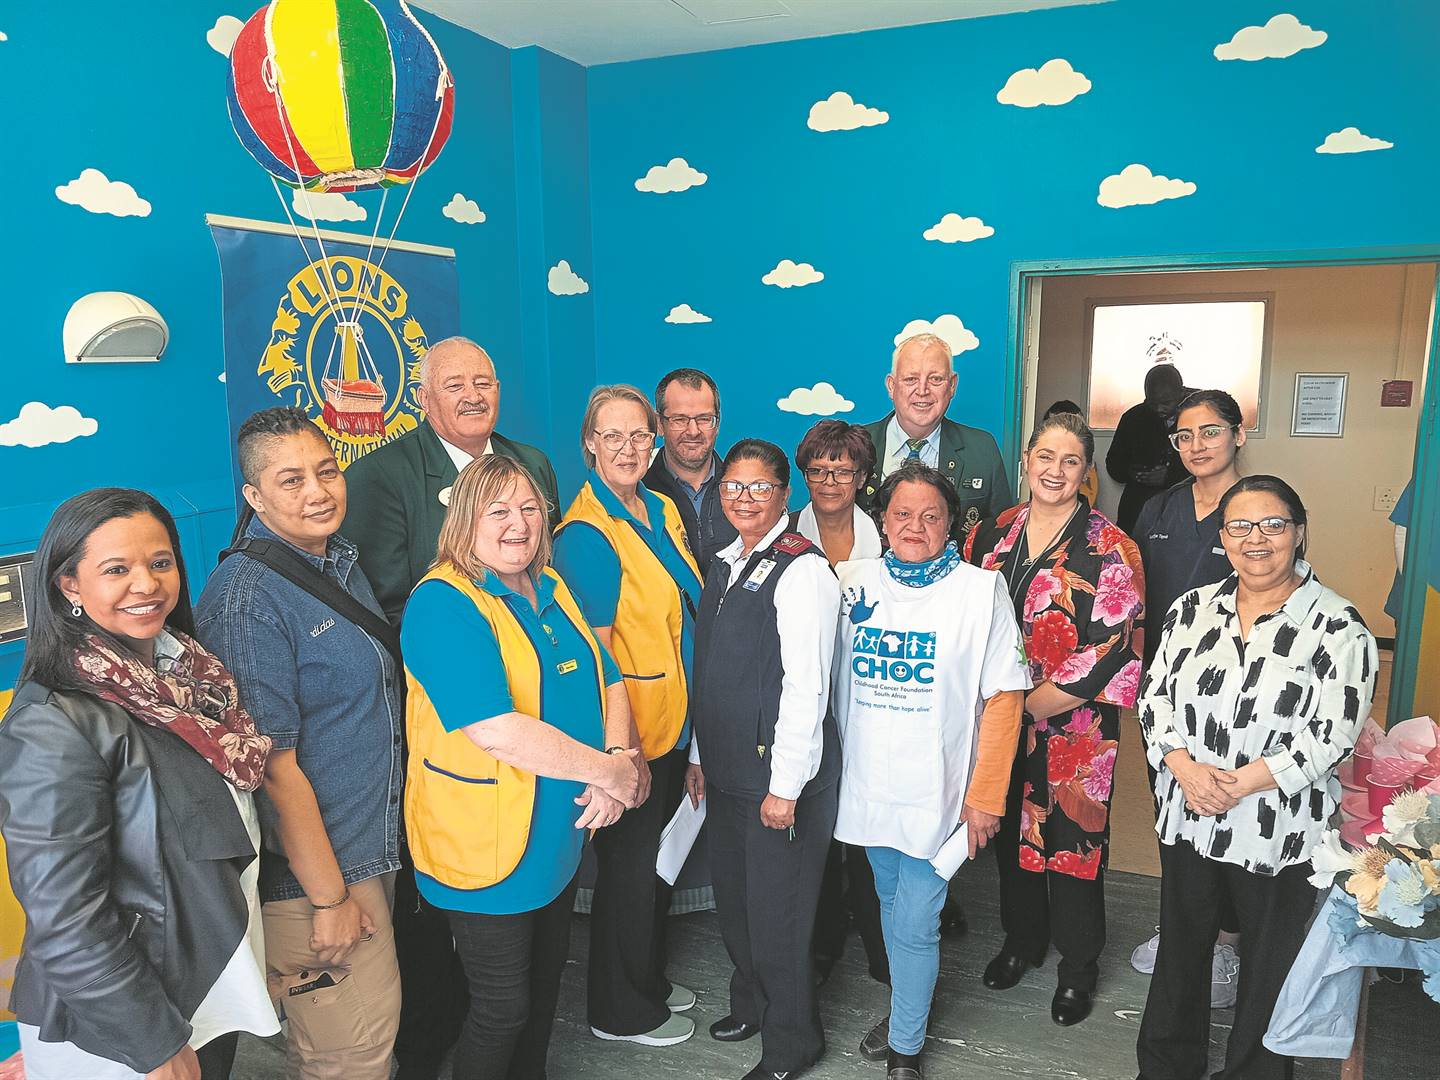 The new play room at the orthopaedic ward at Tygerberg Hospital where children who suffer from cancer are being treated, was officially launched on Wednesday last week. The room was renovated by members of The Lions Club Tokai.PHOTO: Richard Roberts